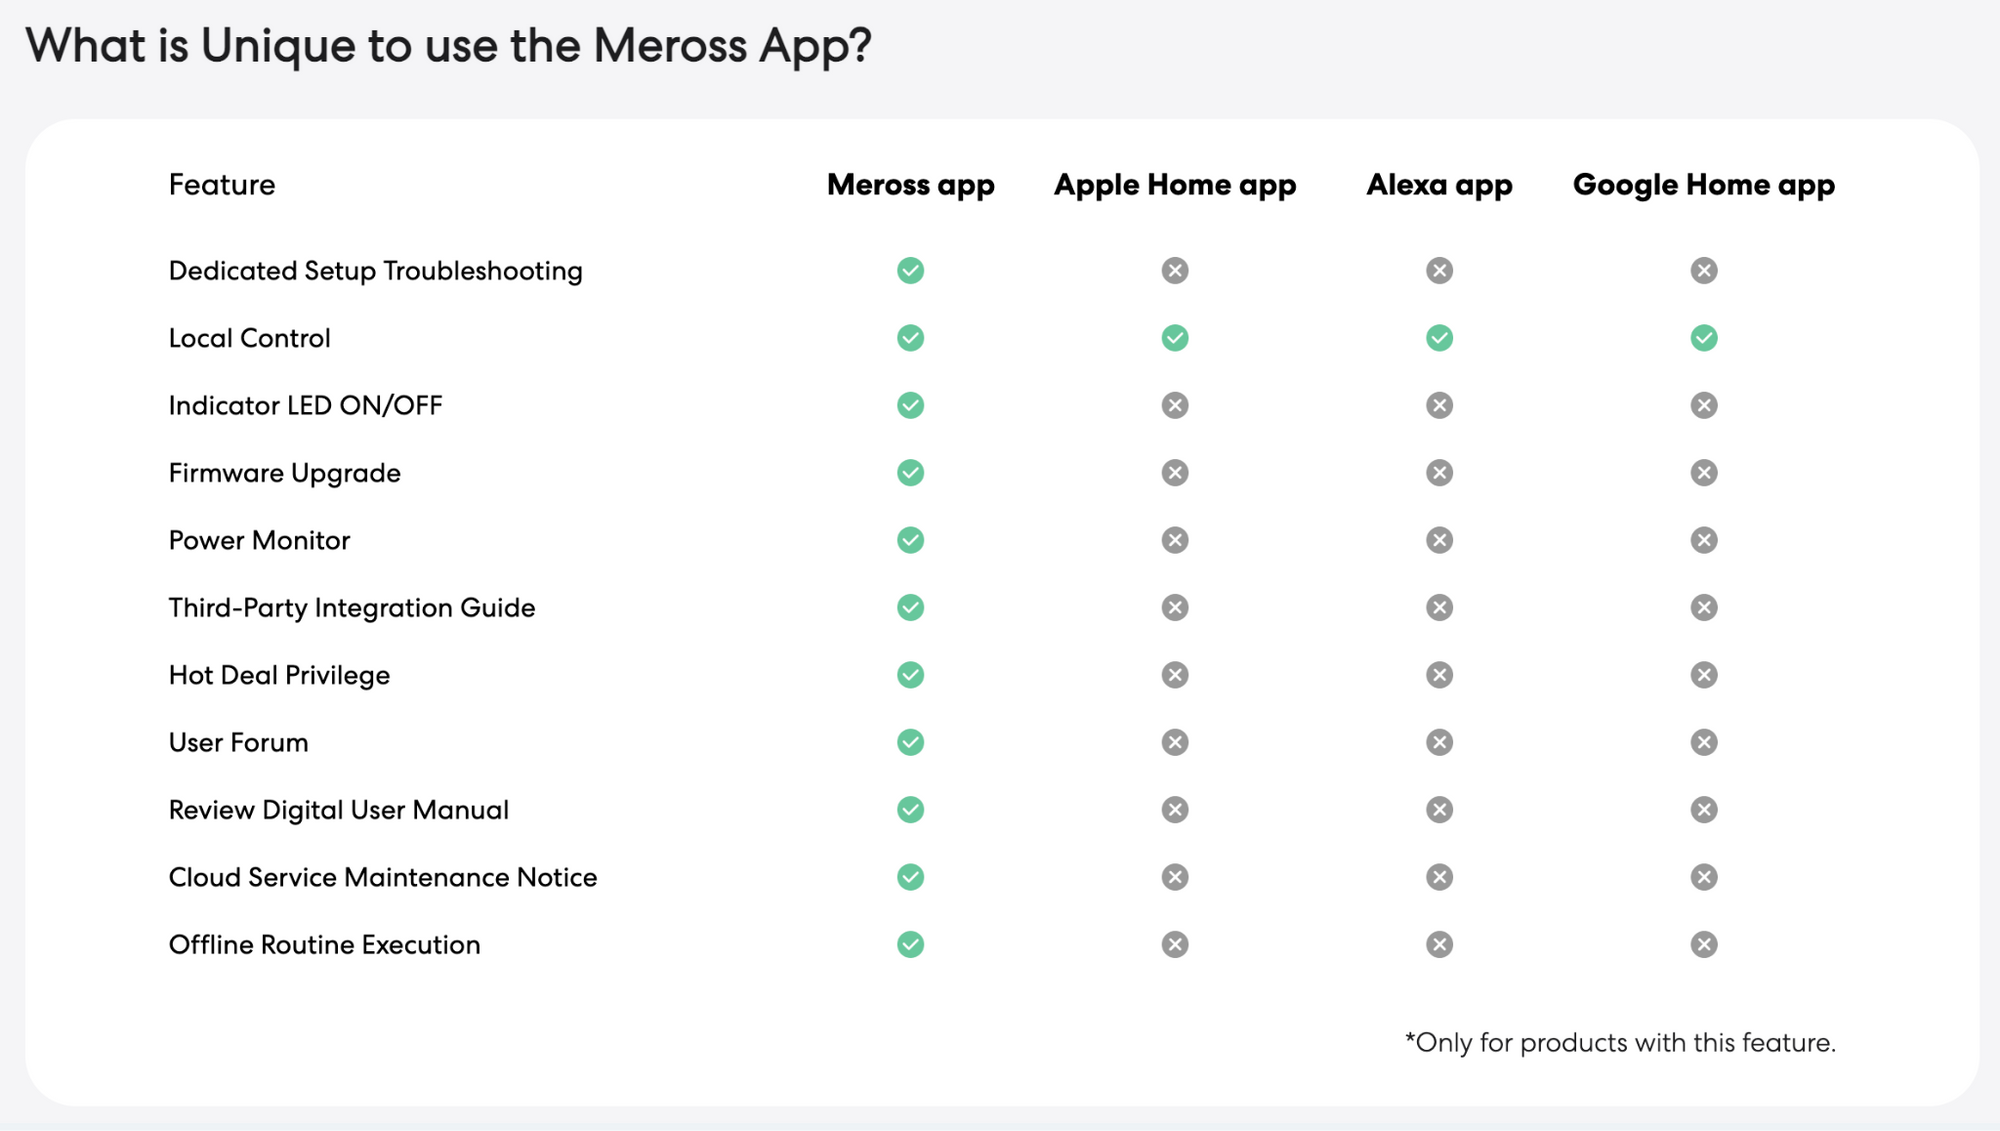 It's a comparison table showing that with Apple, Alexa and Google you only have access to local control. With hte Meross app you have access to things like hot deal privilege, user forum and review digital user manual among some other options.